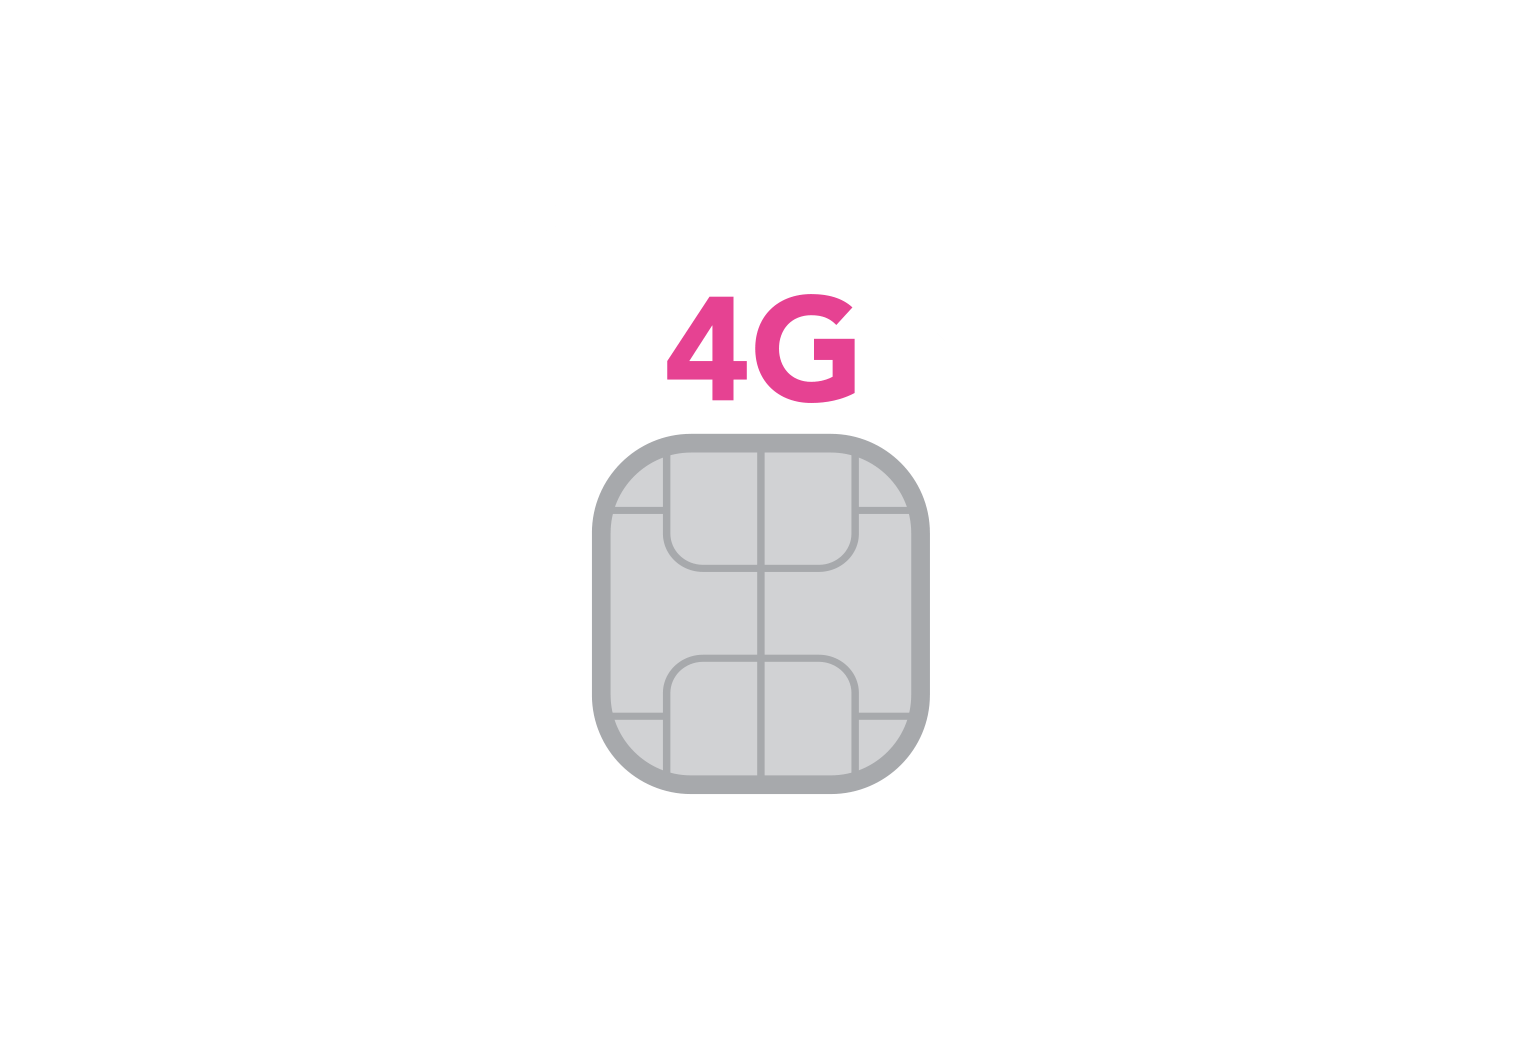 Wireless Standards Explained | 802.11ax, 4G and Bluetooth